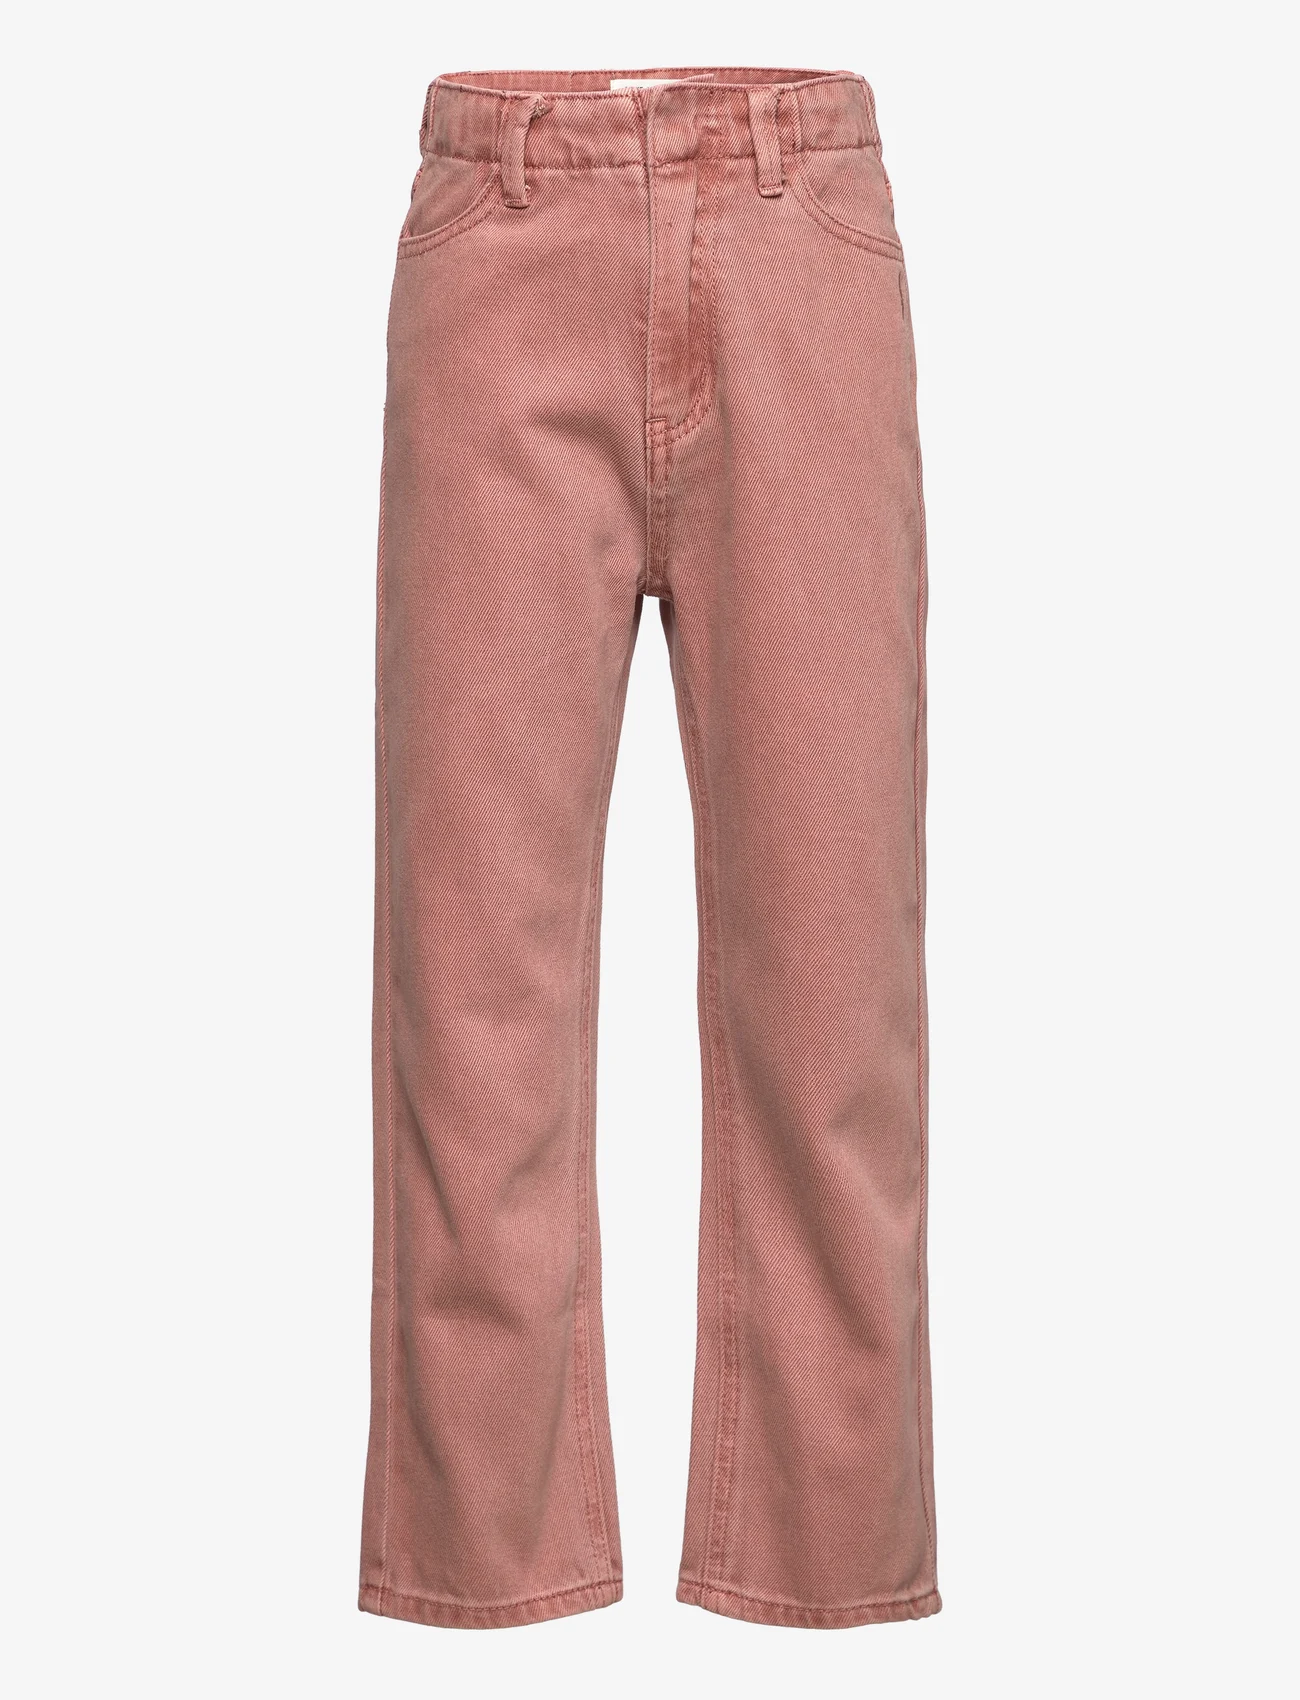 Sofie Schnoor Baby and Kids - G223214 - brede jeans - misty rose - 0